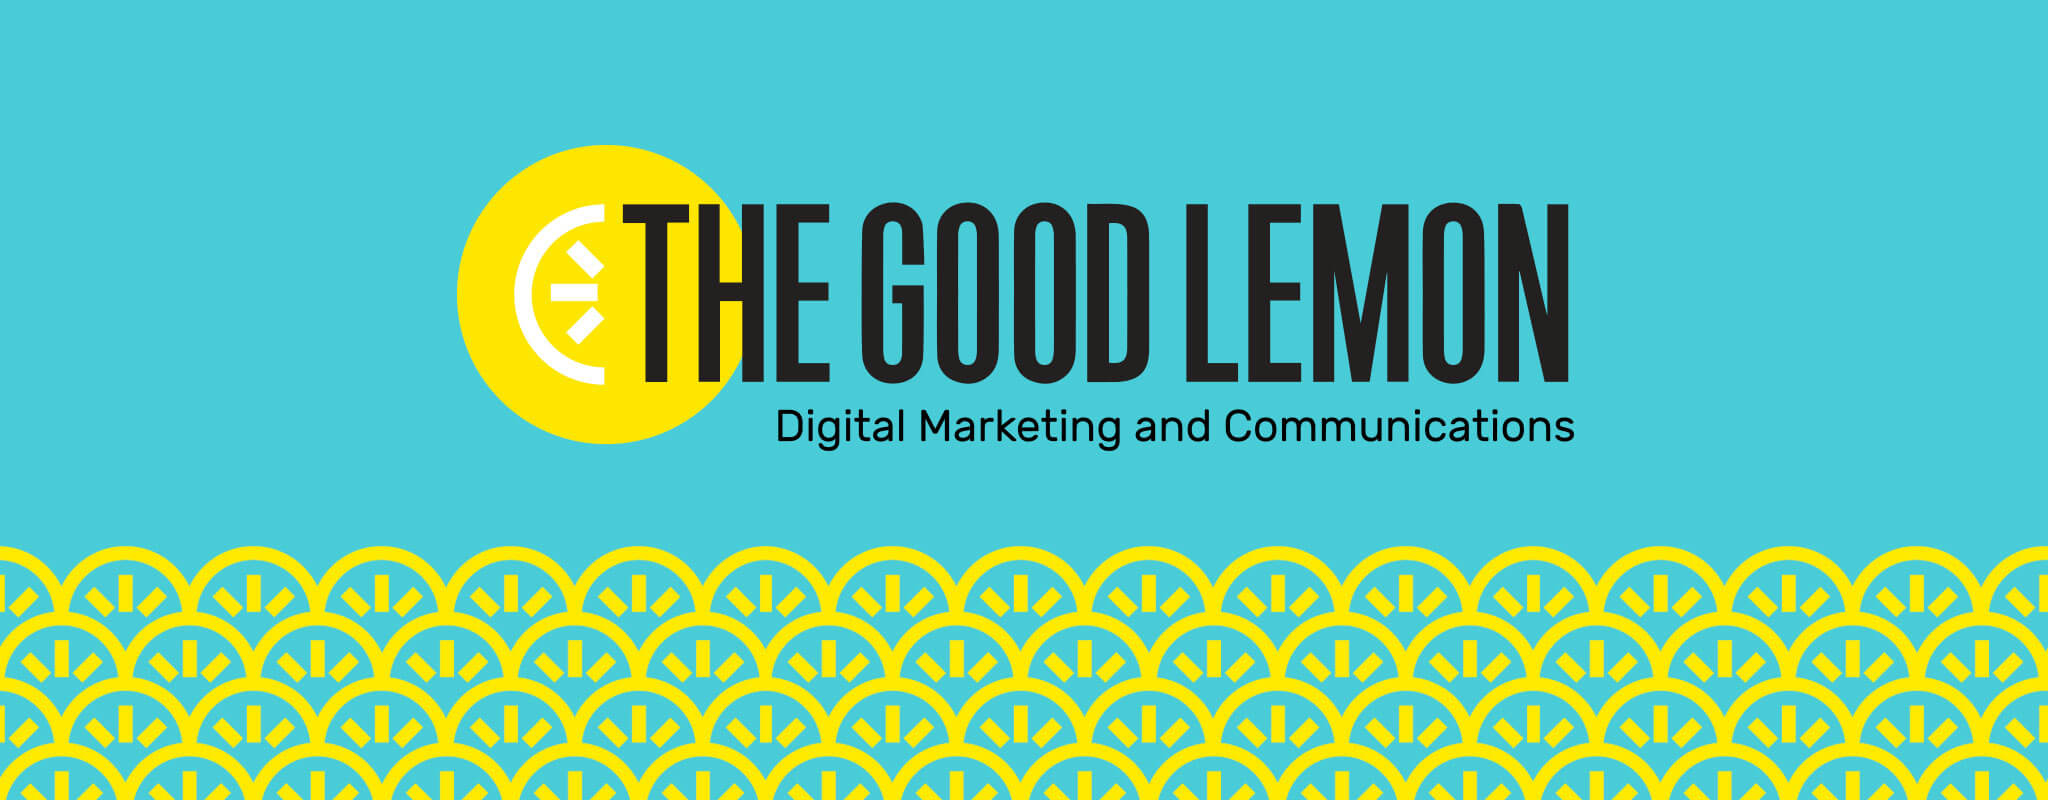 The Good Lemon logo on a field of blue. The bottom of the is a yellow pattern made up of the semi circles and three bars.